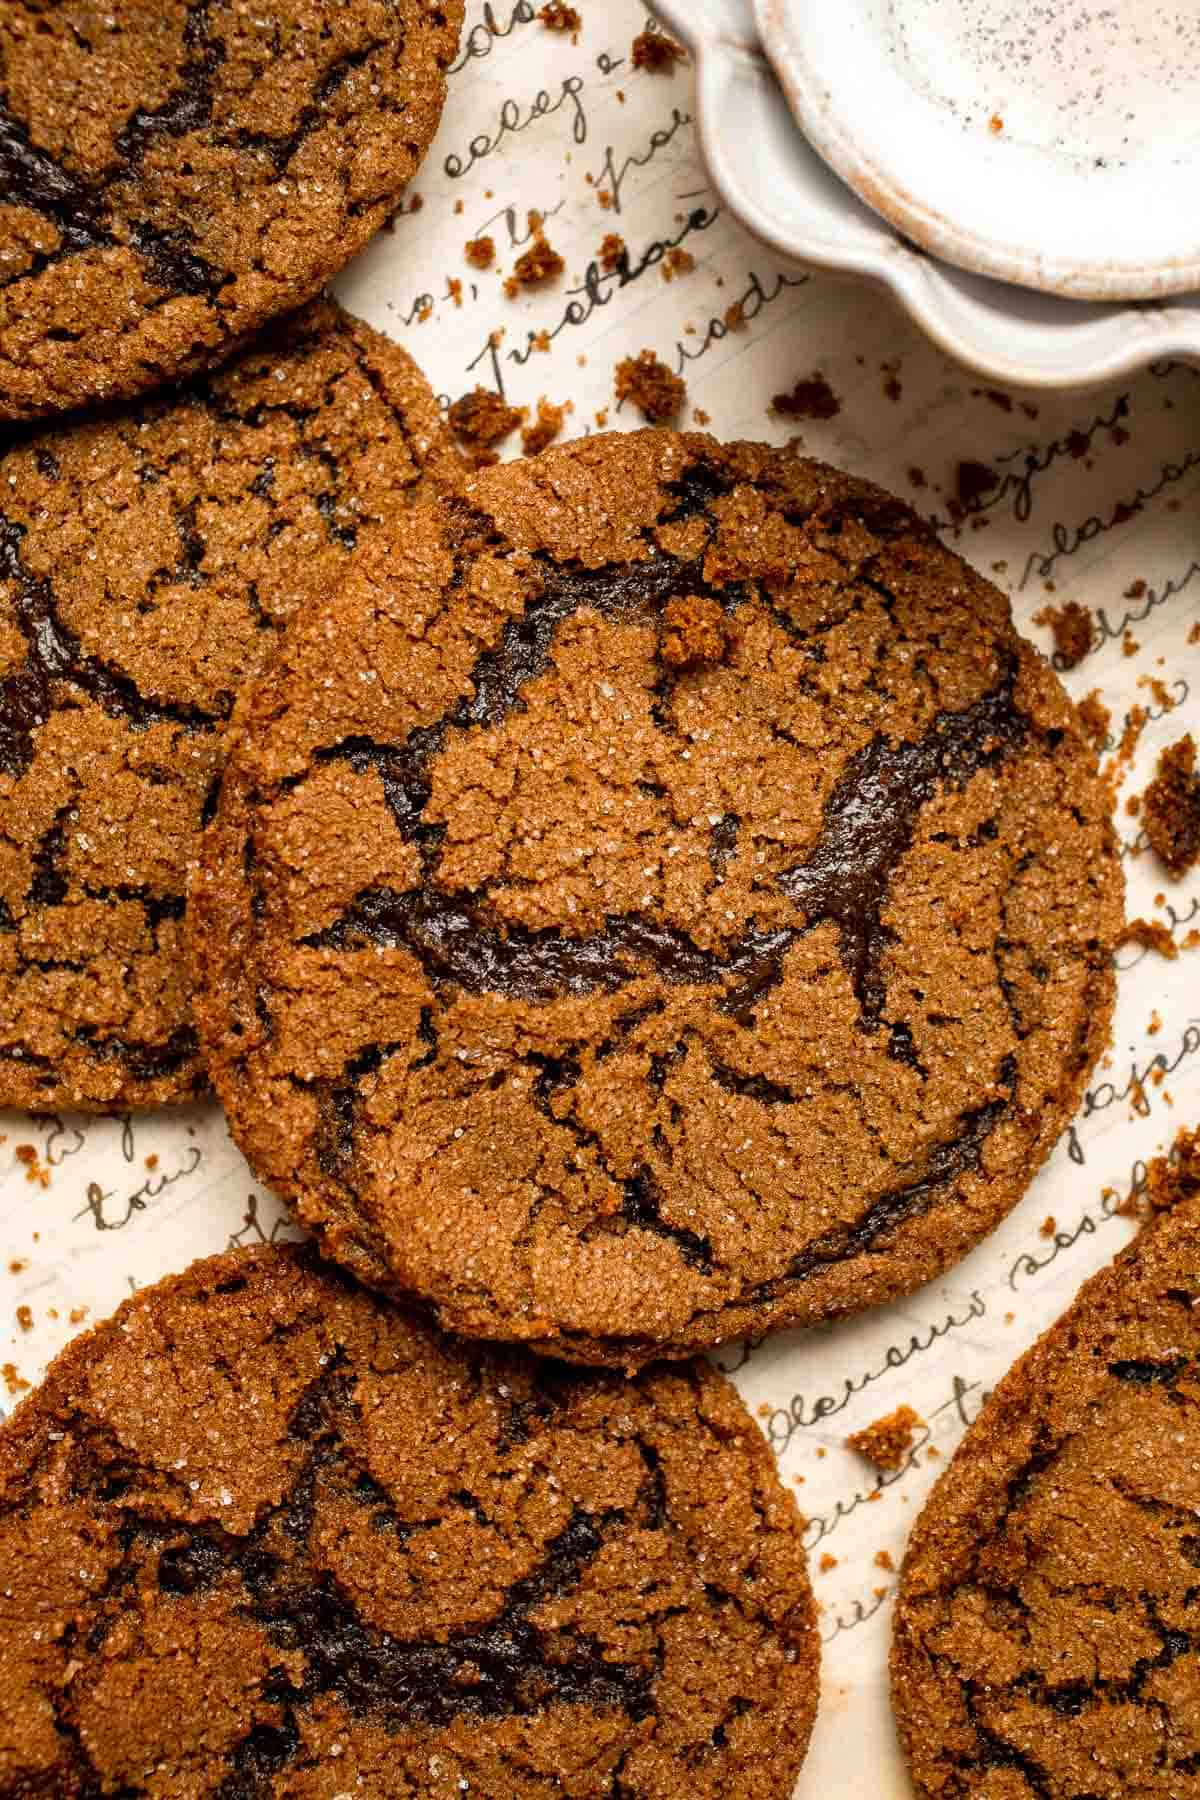 Molasses Cookies are a popular holiday treat with a crispy exterior and a soft, chewy center which makes them irresistible regardless of the season. | aheadofthyme.com